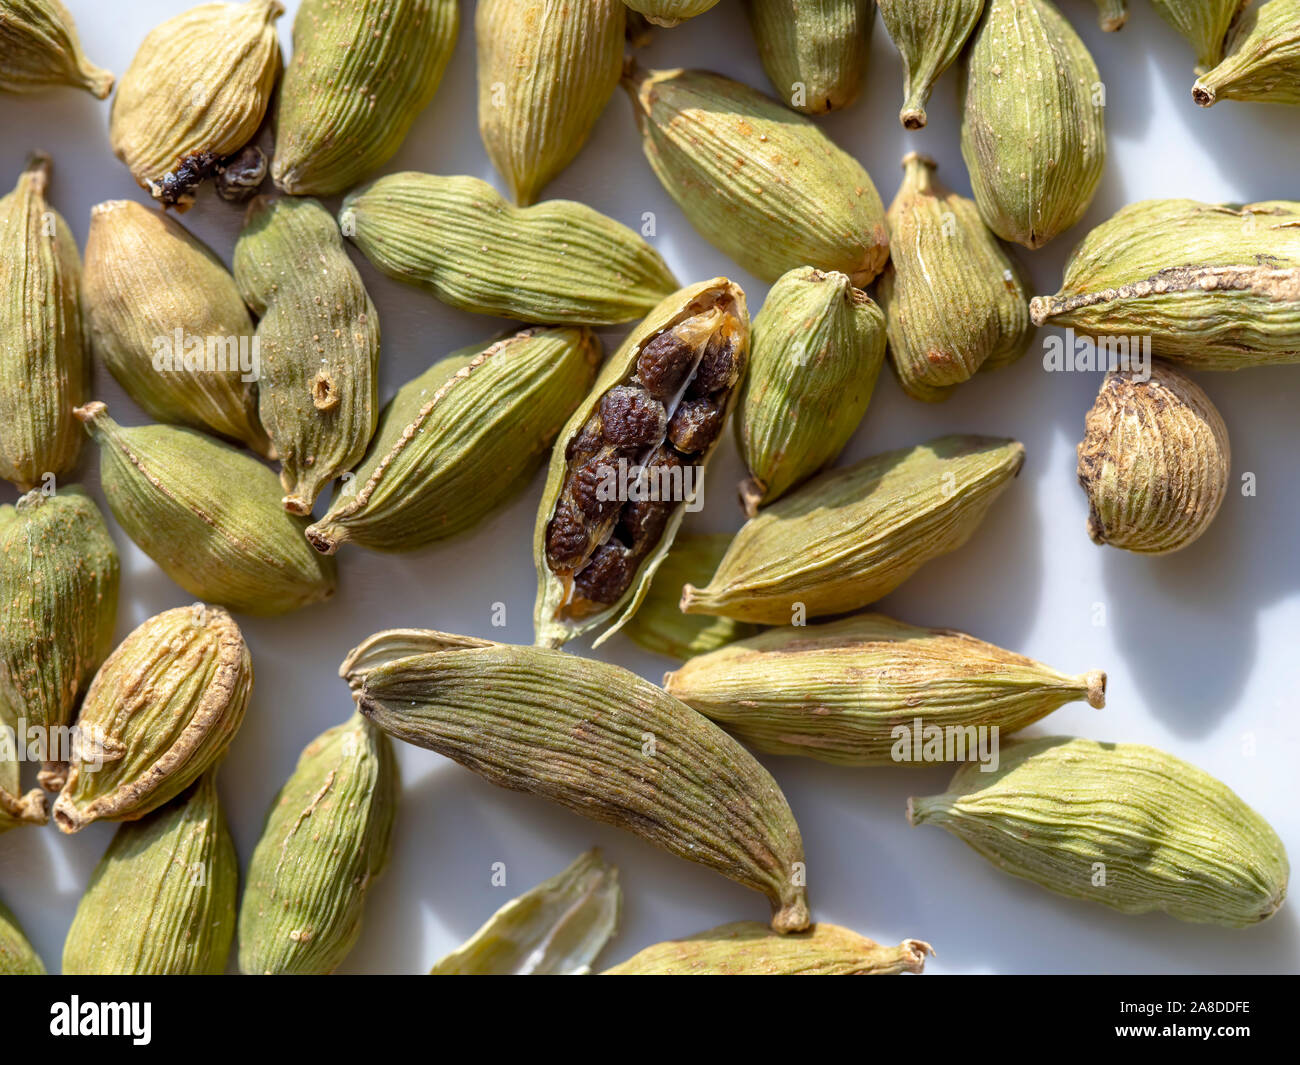 Cardamom seeds is a spice made from the seeds of several plants in the genera Elettaria and Amomum in the family Zingiberaceae. Stock Photo